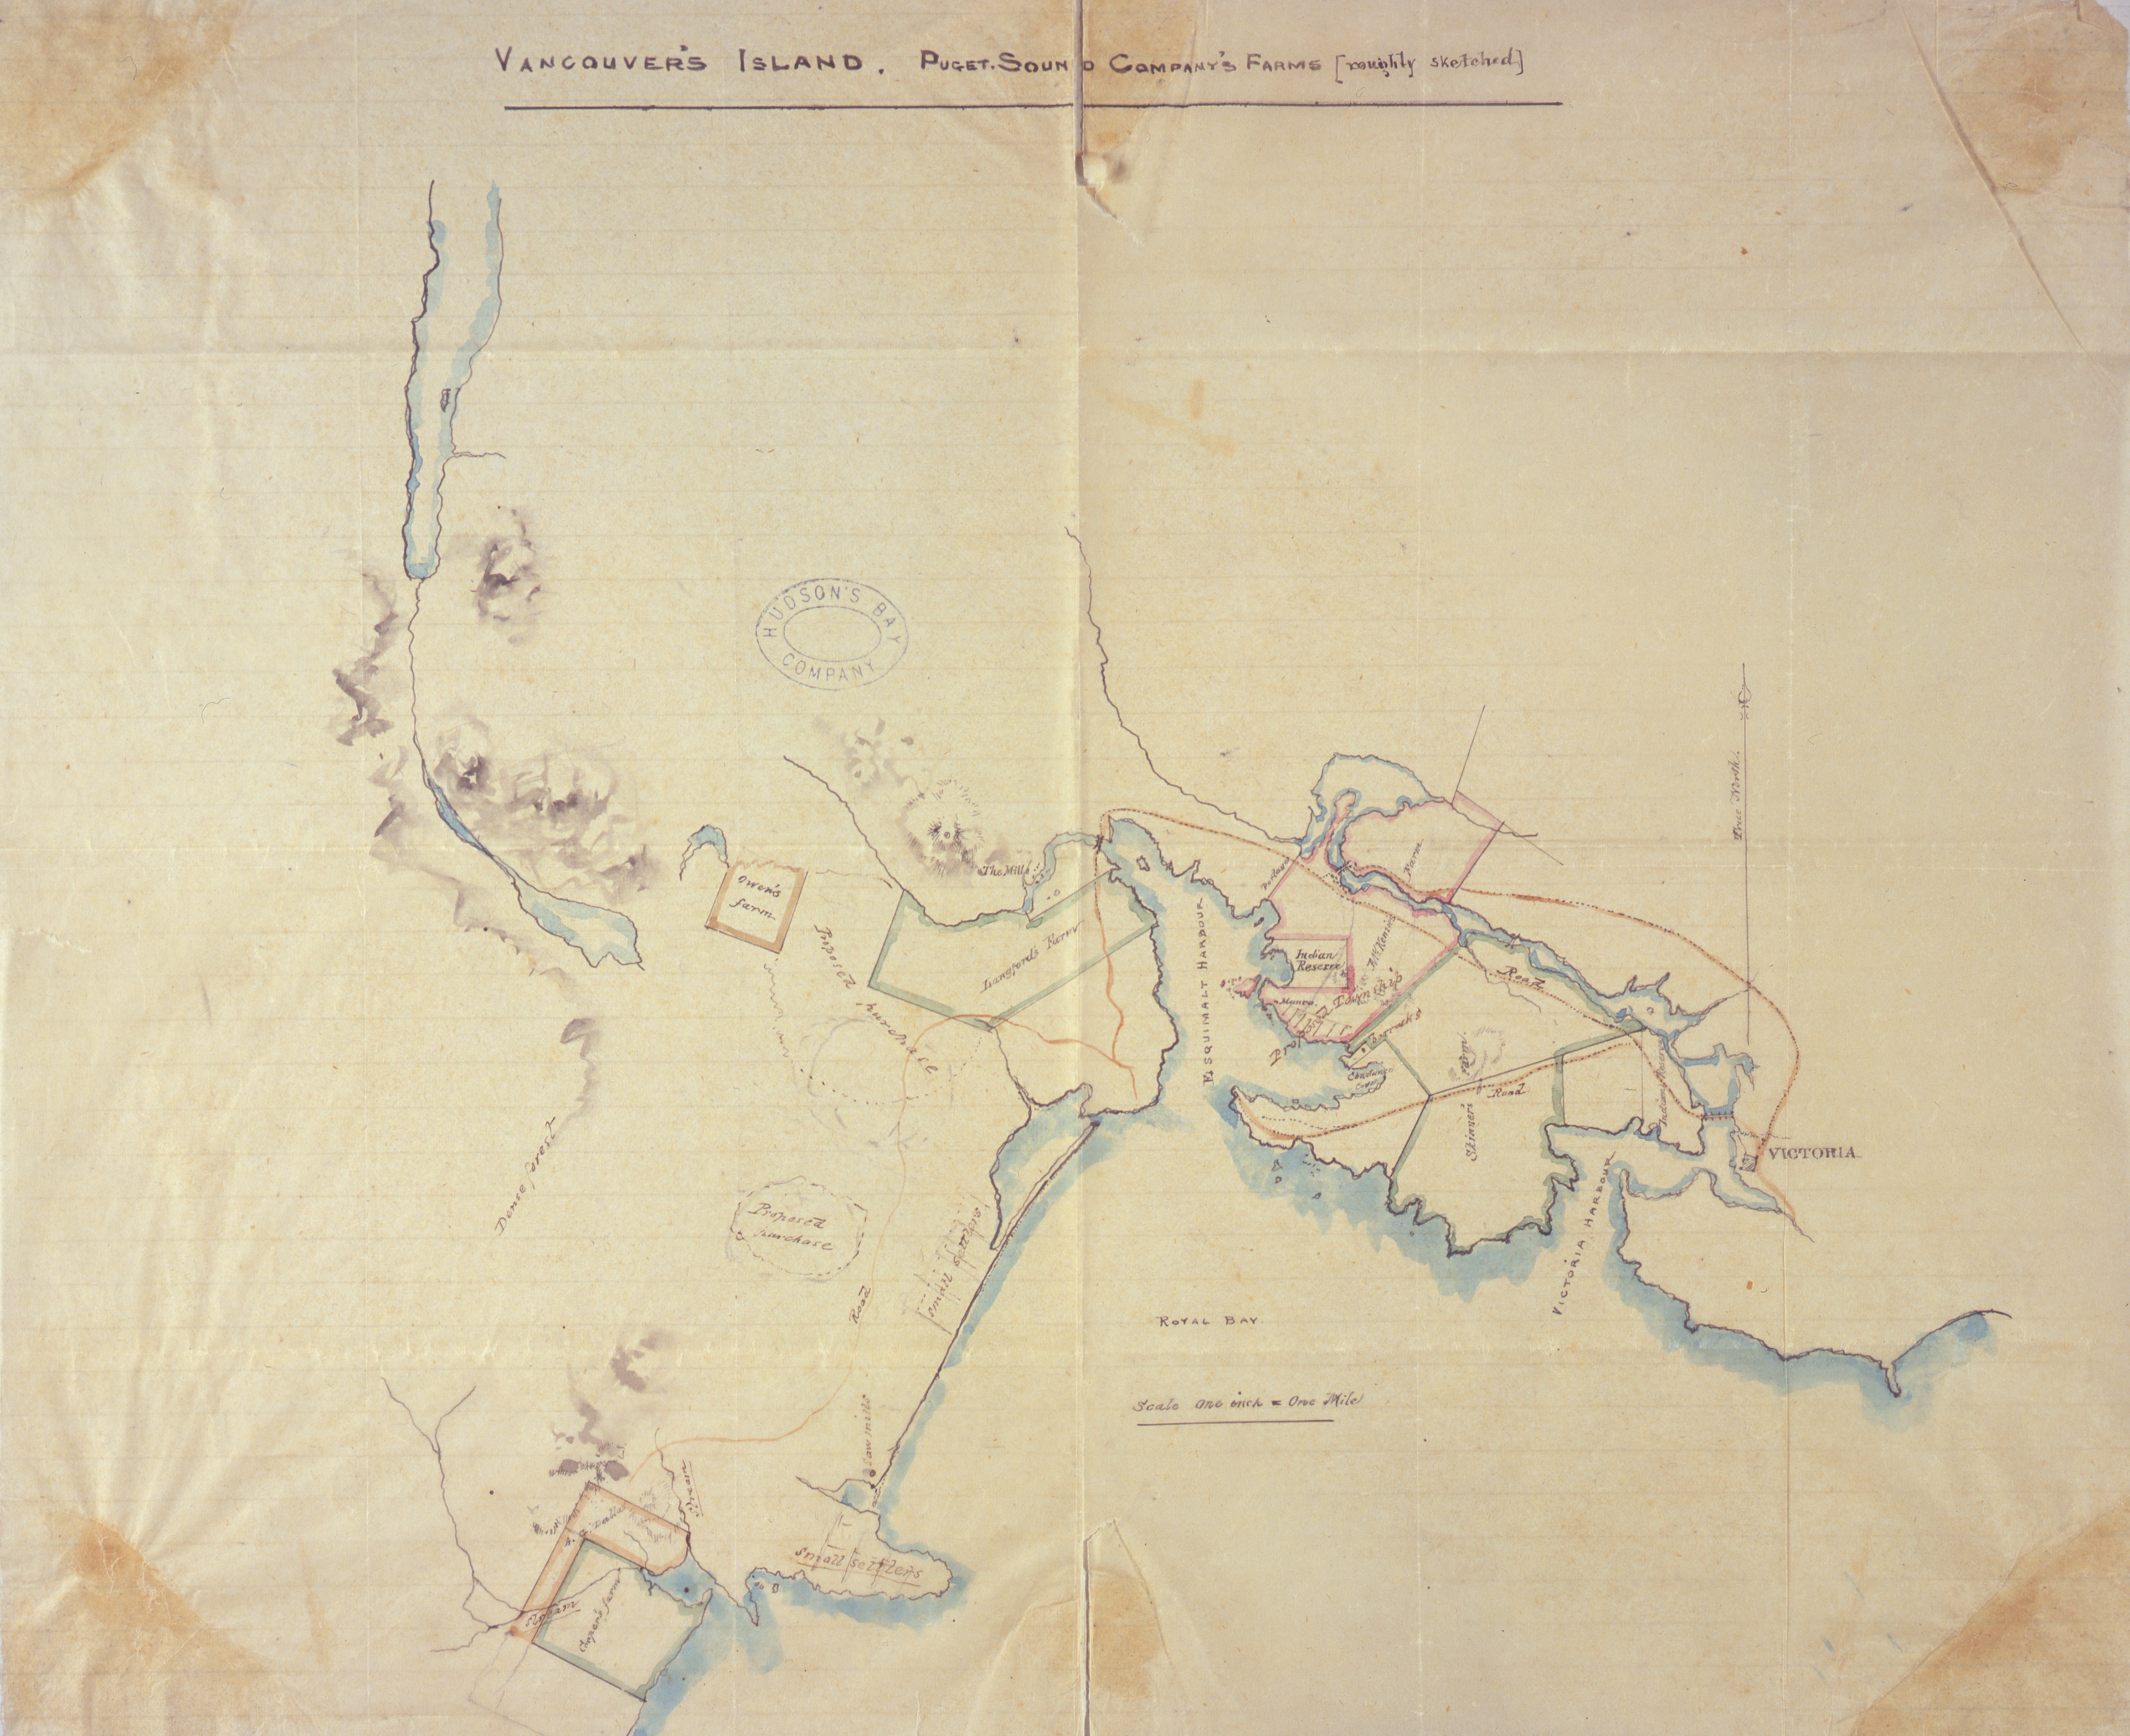 Vancouver's Island. Puget Sound Company's Farms [roughly sketched]